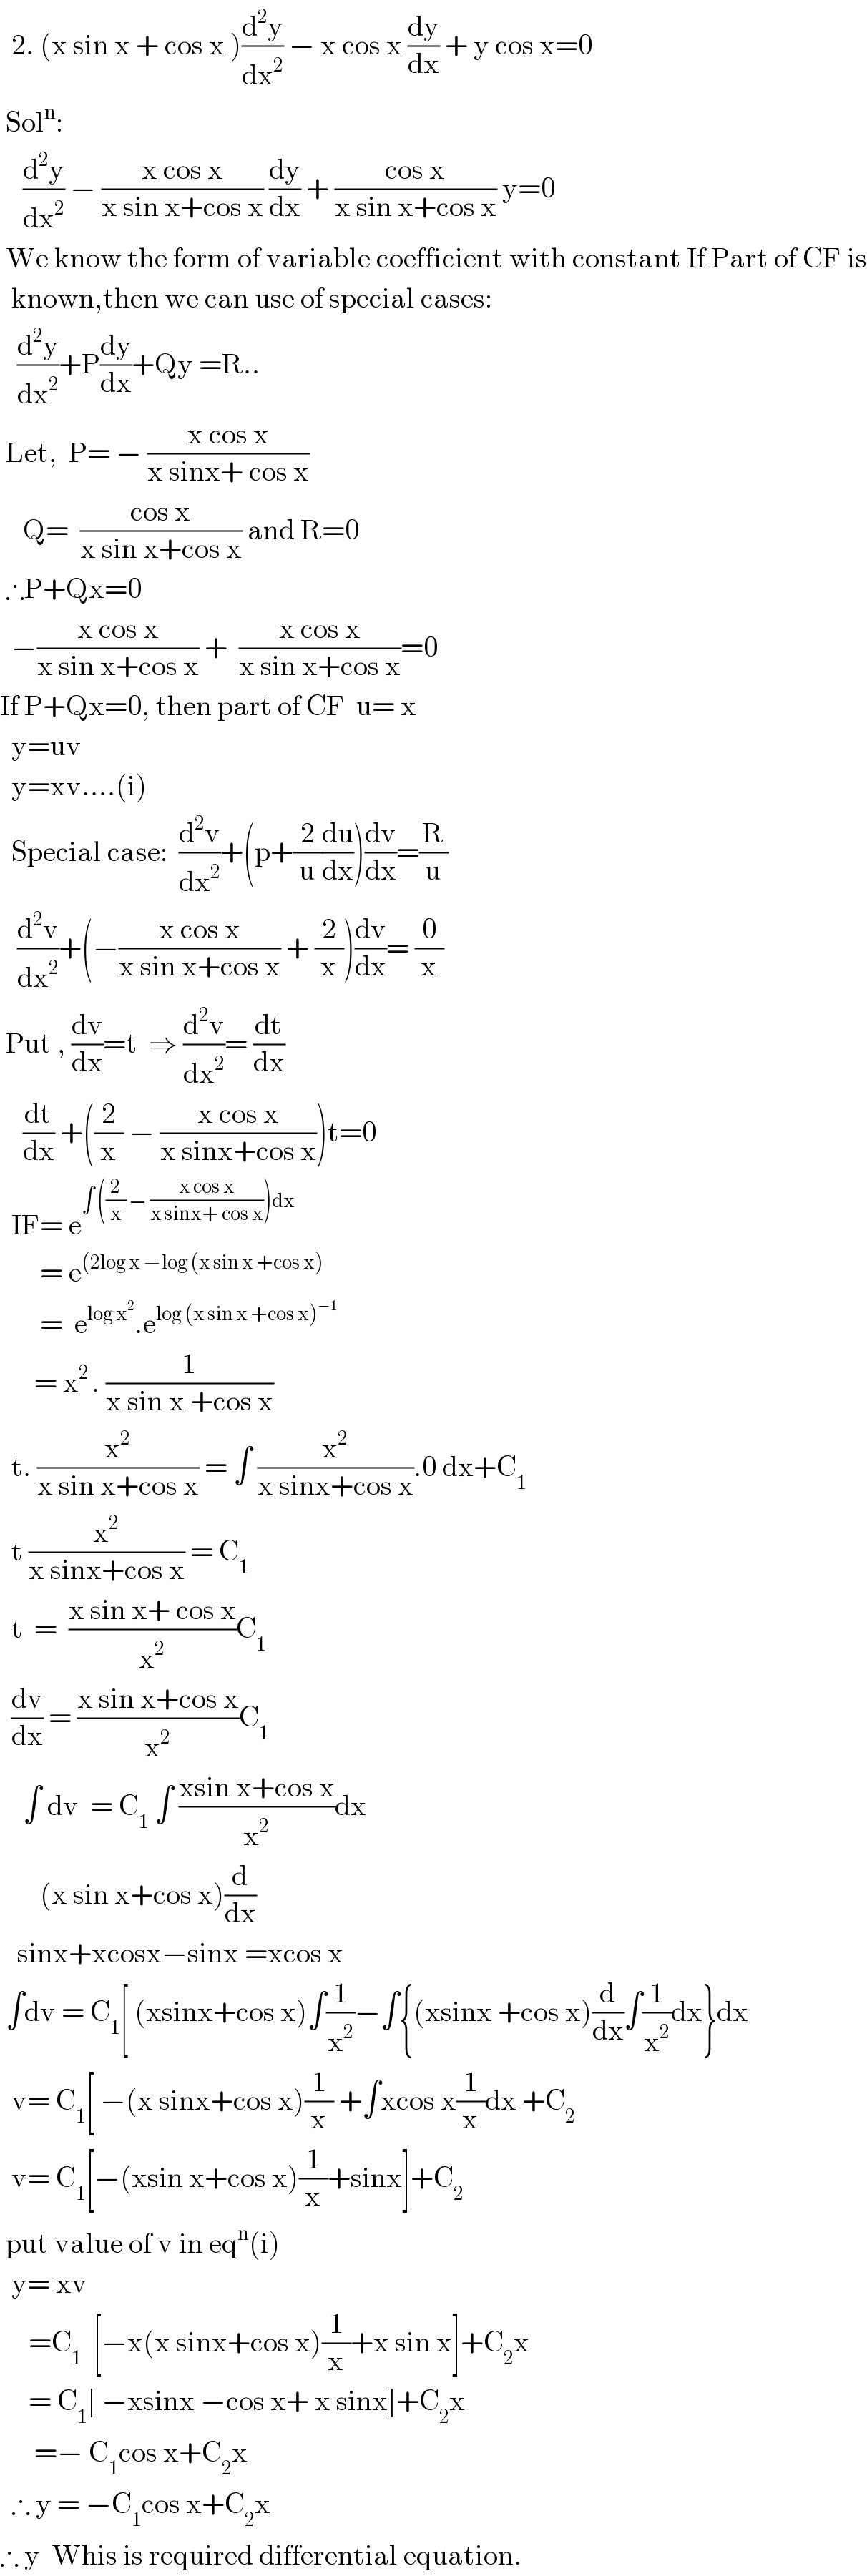   2. (x sin x + cos x )(d^2 y/dx^2 ) − x cos x (dy/dx) + y cos x=0   Sol^n :      (d^2 y/dx^2 ) − ((x cos x)/(x sin x+cos x)) (dy/dx) + ((cos x)/(x sin x+cos x)) y=0   We know the form of variable coefficient with constant If Part of CF is    known,then we can use of special cases:     (d^2 y/dx^2 )+P(dy/dx)+Qy =R..   Let,  P= − ((x cos x)/(x sinx+ cos x))      Q=  ((cos x)/(x sin x+cos x)) and R=0   ∴P+Qx=0    −((x cos x)/(x sin x+cos x)) +  ((x cos x)/(x sin x+cos x))=0  If P+Qx=0, then part of CF  u= x    y=uv    y=xv....(i)    Special case:  (d^2 v/dx^2 )+(p+(2/u)(du/dx))(dv/dx)=(R/u)     (d^2 v/dx^2 )+(−((x cos x)/(x sin x+cos x)) + (2/x))(dv/dx)= (0/x)   Put , (dv/dx)=t  ⇒ (d^2 v/dx^2 )= (dt/dx)      (dt/dx) +((2/x) − ((x cos x)/(x sinx+cos x)))t=0    IF= e^(∫ ((2/x) − ((x cos x)/(x sinx+ cos x)))dx)          = e^((2log x −log (x sin x +cos x))          =  e^(log x^2 ) .e^(log (x sin x +cos x)^(−1) )         = x^(2 ) . (1/(x sin x +cos x))    t. (x^2 /(x sin x+cos x)) = ∫ (x^2 /(x sinx+cos x)).0 dx+C_1     t (x^2 /(x sinx+cos x)) = C_1     t  =  ((x sin x+ cos x)/x^2 )C_1     (dv/dx) = ((x sin x+cos x)/x^2 )C_1       ∫ dv  = C_1  ∫ ((xsin x+cos x)/x^2 )dx         (x sin x+cos x)(d/dx)     sinx+xcosx−sinx =xcos x    ∫dv = C_1 [ (xsinx+cos x)∫(1/x^2 )−∫{(xsinx +cos x)(d/dx)∫(1/x^2 )dx}dx    v= C_1 [ −(x sinx+cos x)(1/x) +∫xcos x(1/x)dx +C_2     v= C_1 [−(xsin x+cos x)(1/x)+sinx]+C_2    put value of v in eq^n (i)    y= xv       =C_1   [−x(x sinx+cos x)(1/x)+x sin x]+C_2 x       = C_1 [ −xsinx −cos x+ x sinx]+C_2 x        =− C_1 cos x+C_2 x    ∴ y = −C_1 cos x+C_2 x  ∴ y  Whis is required differential equation.  